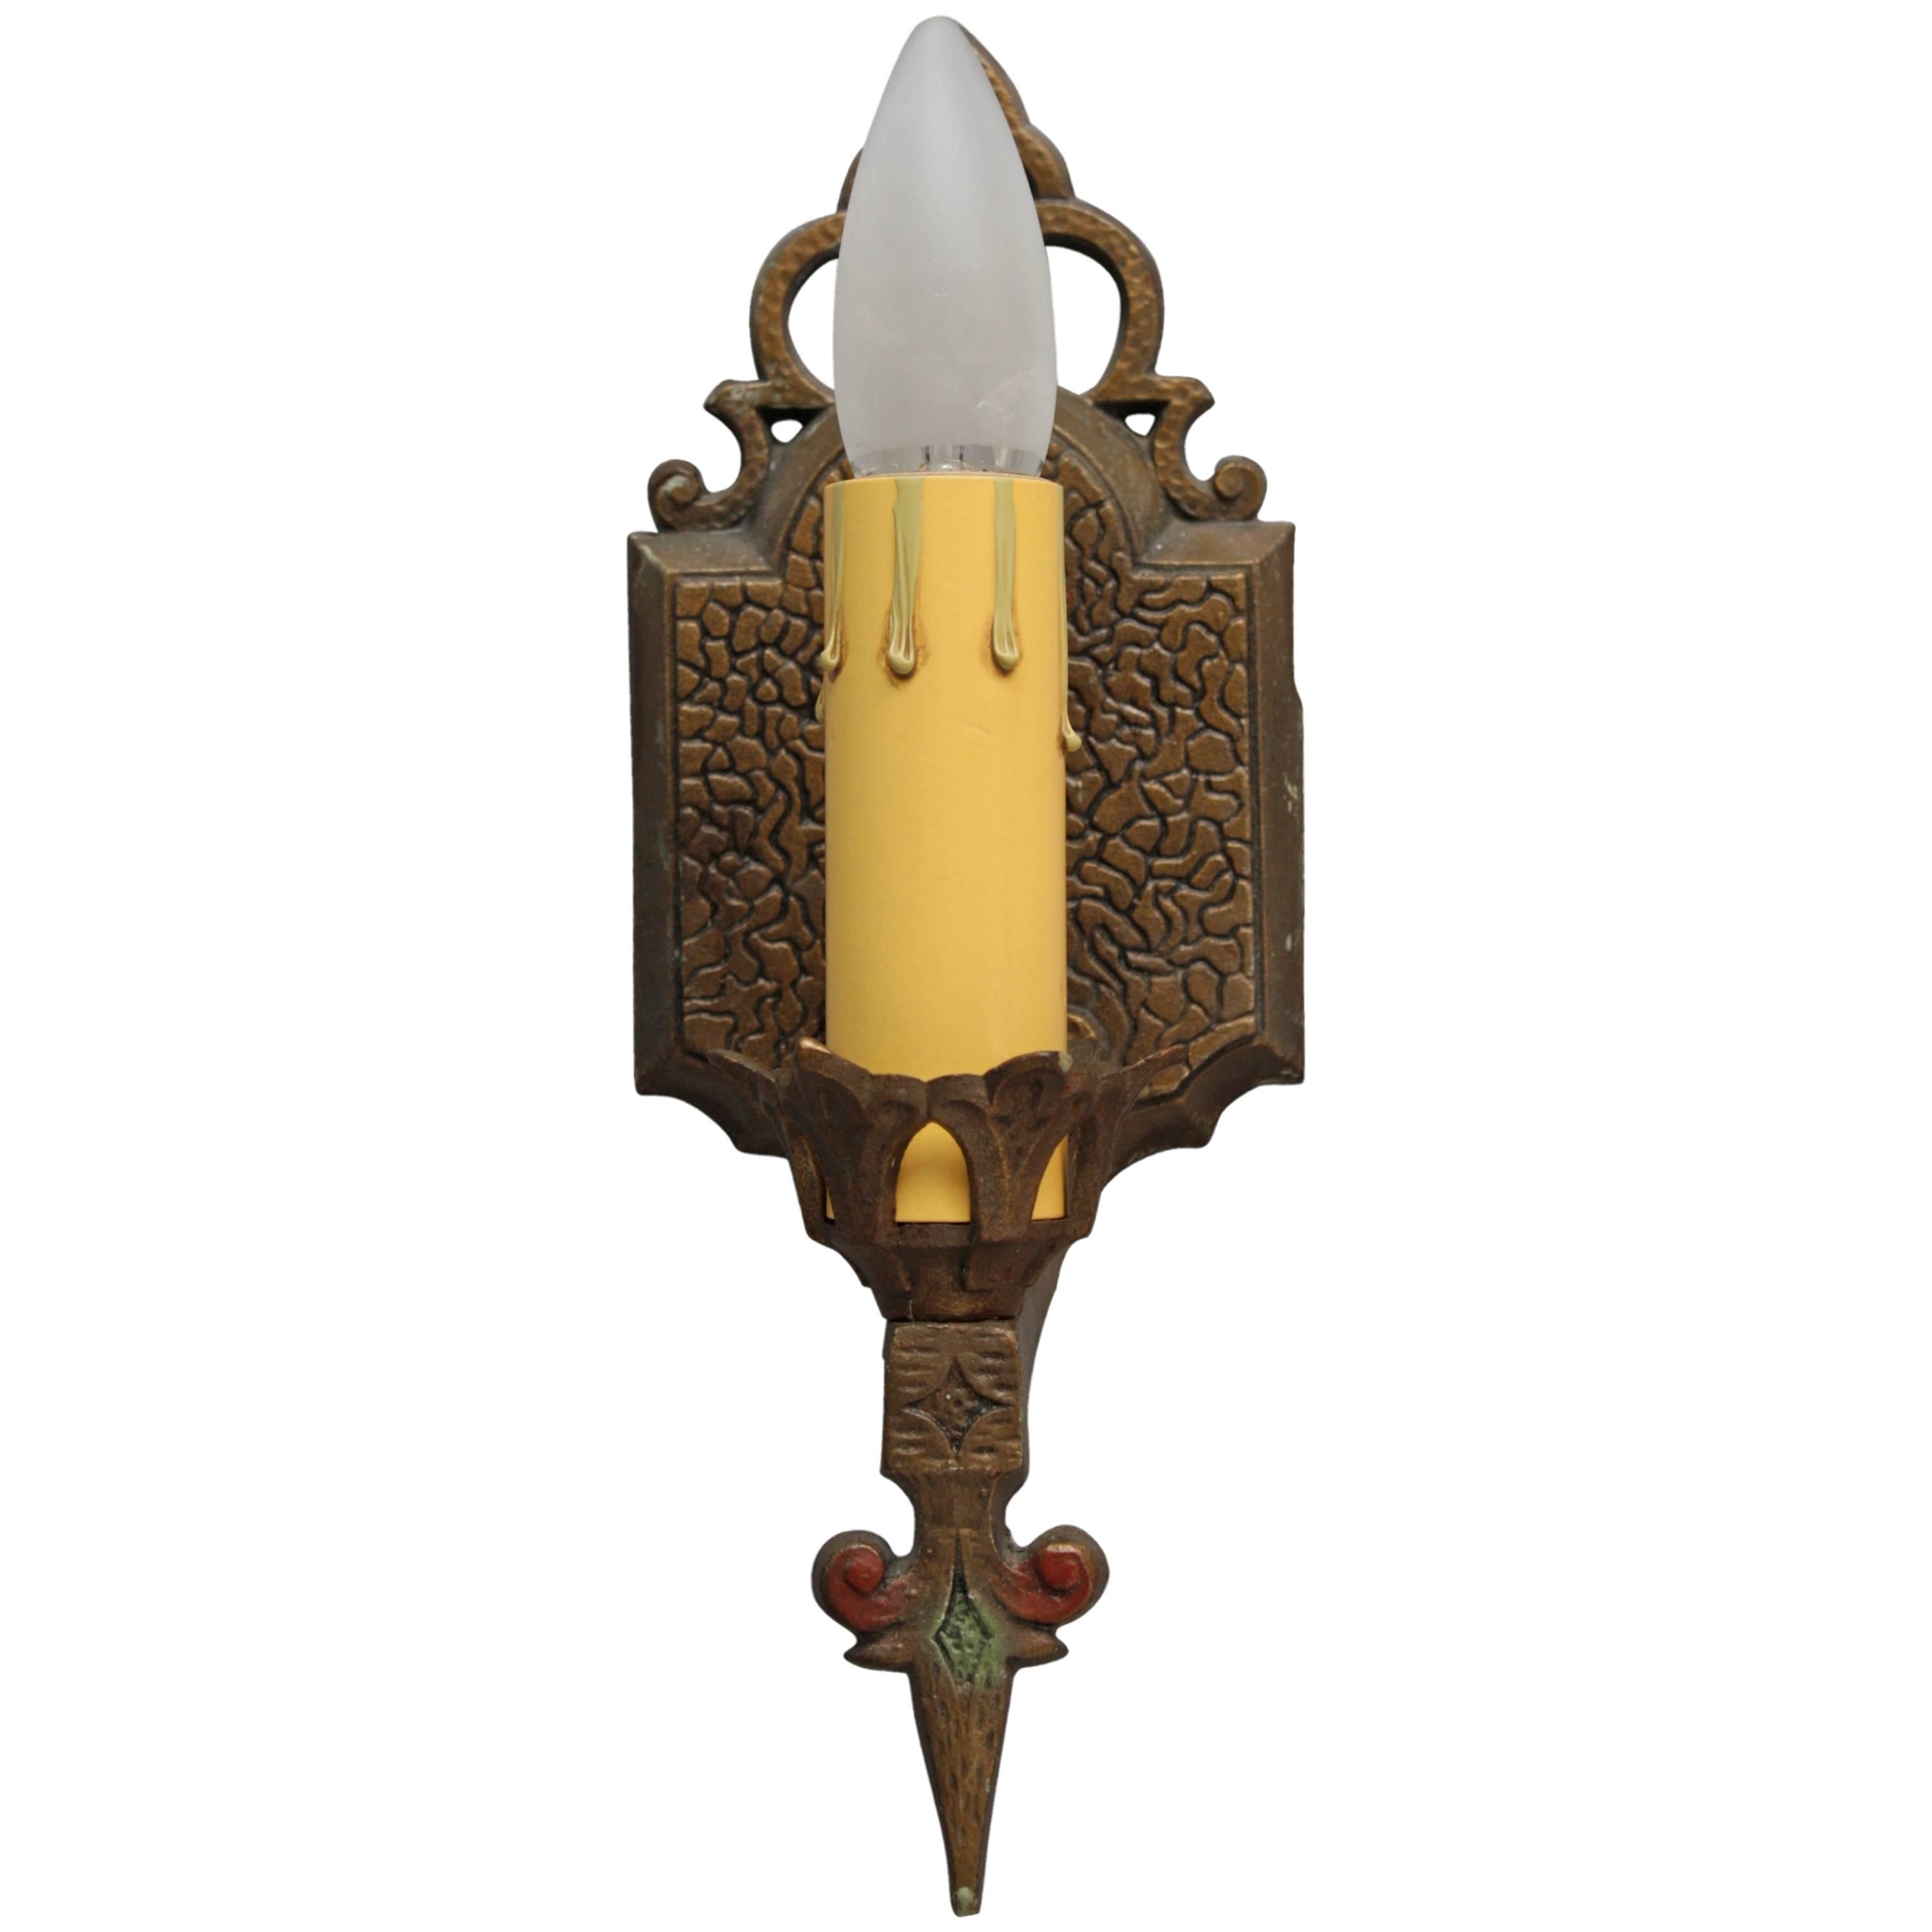 One of Five 1920s Spanish Revival Single-Light Sconces For Sale